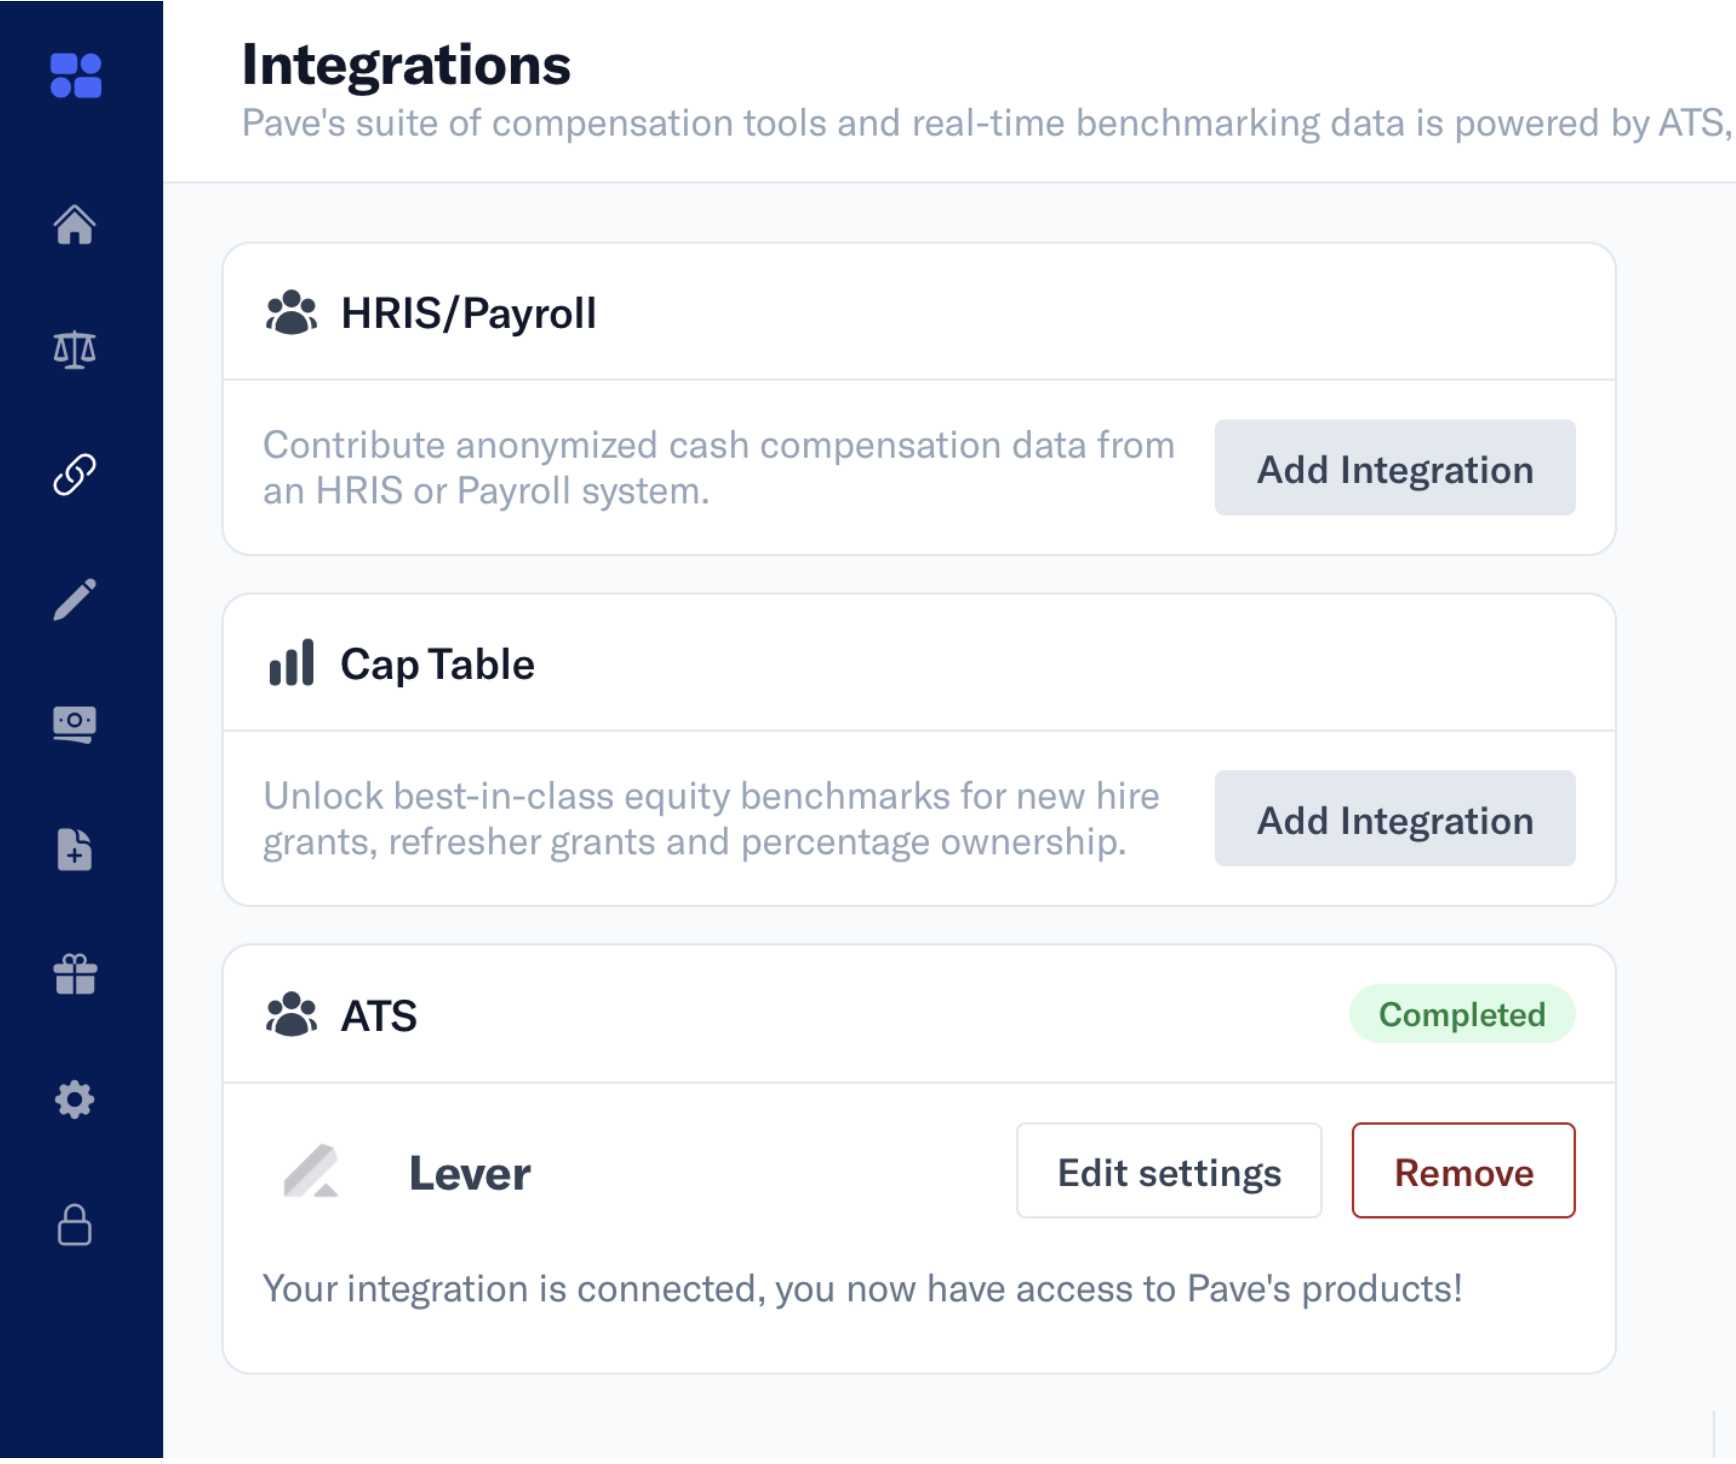 Integrations page in Pave; Lever is listed as under ATS heading as completed